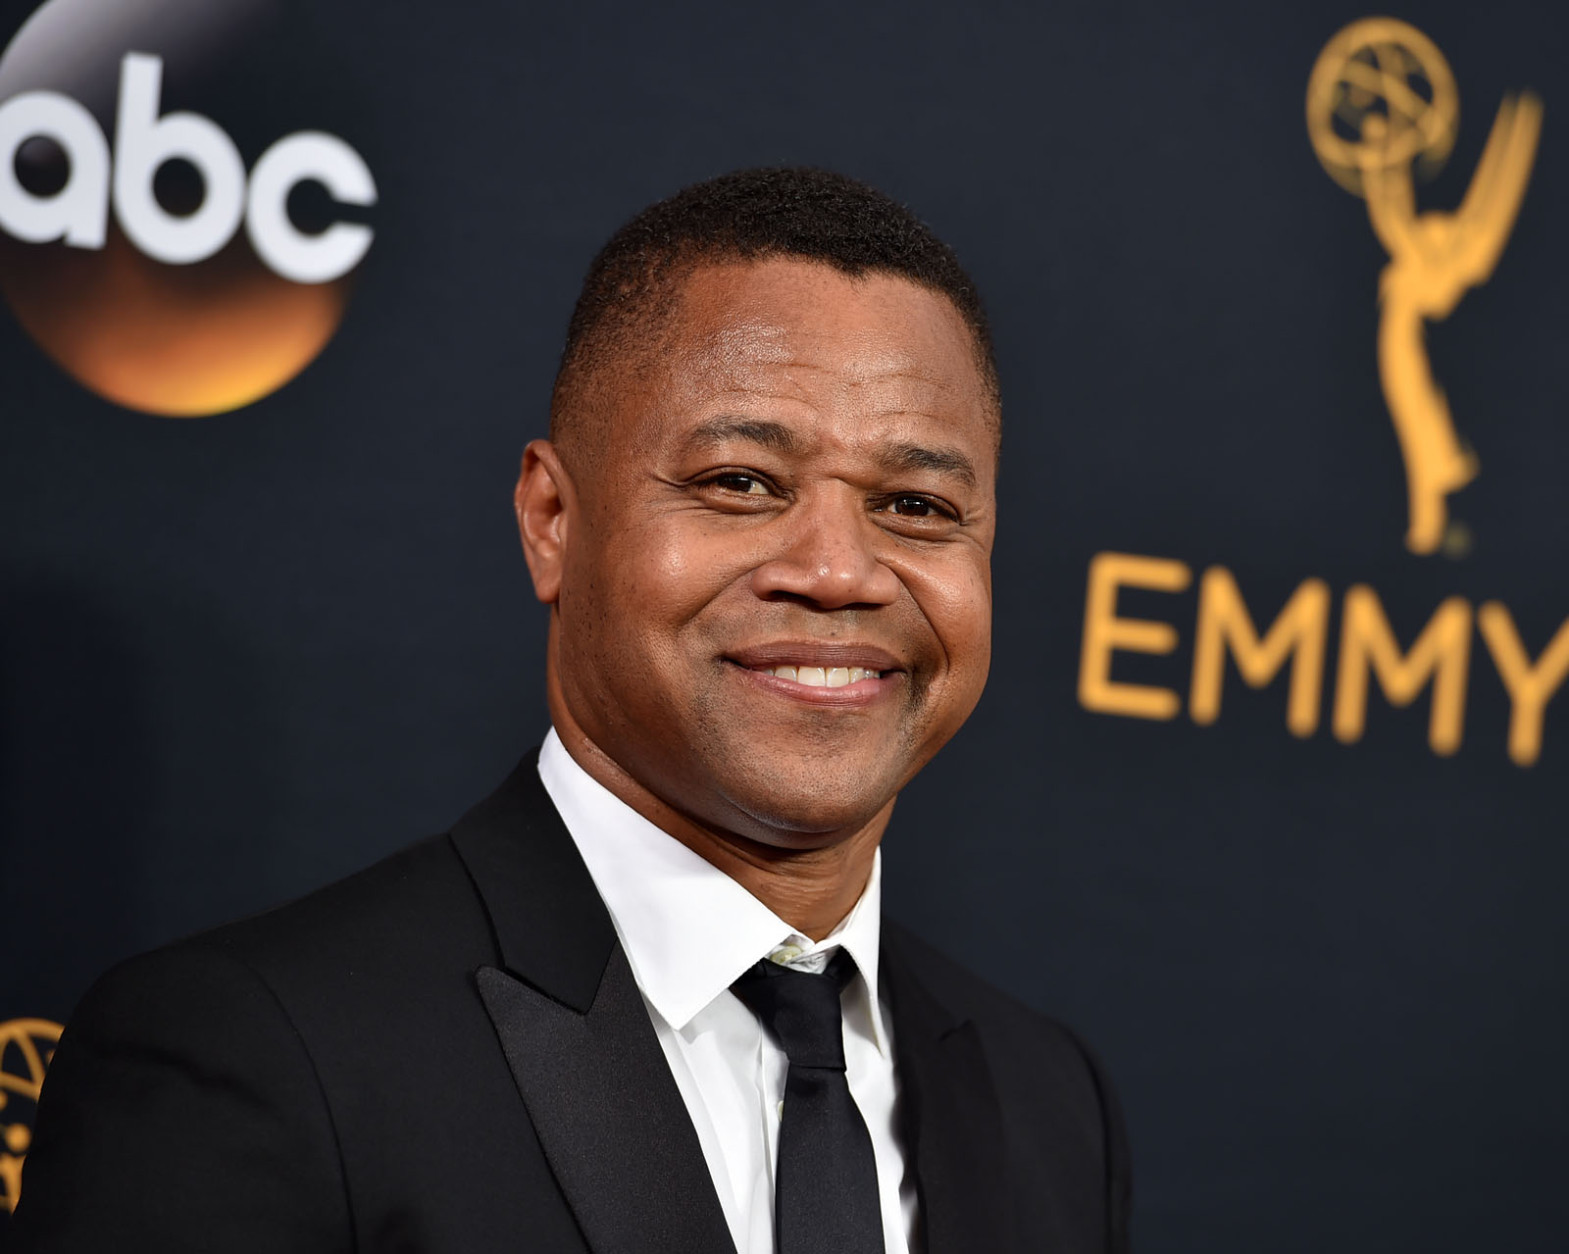 Cuba Gooding Jr. arrives at the 68th Primetime Emmy Awards on Sunday, Sept. 18, 2016, at the Microsoft Theater in Los Angeles. (Photo by Jordan Strauss/Invision/AP)